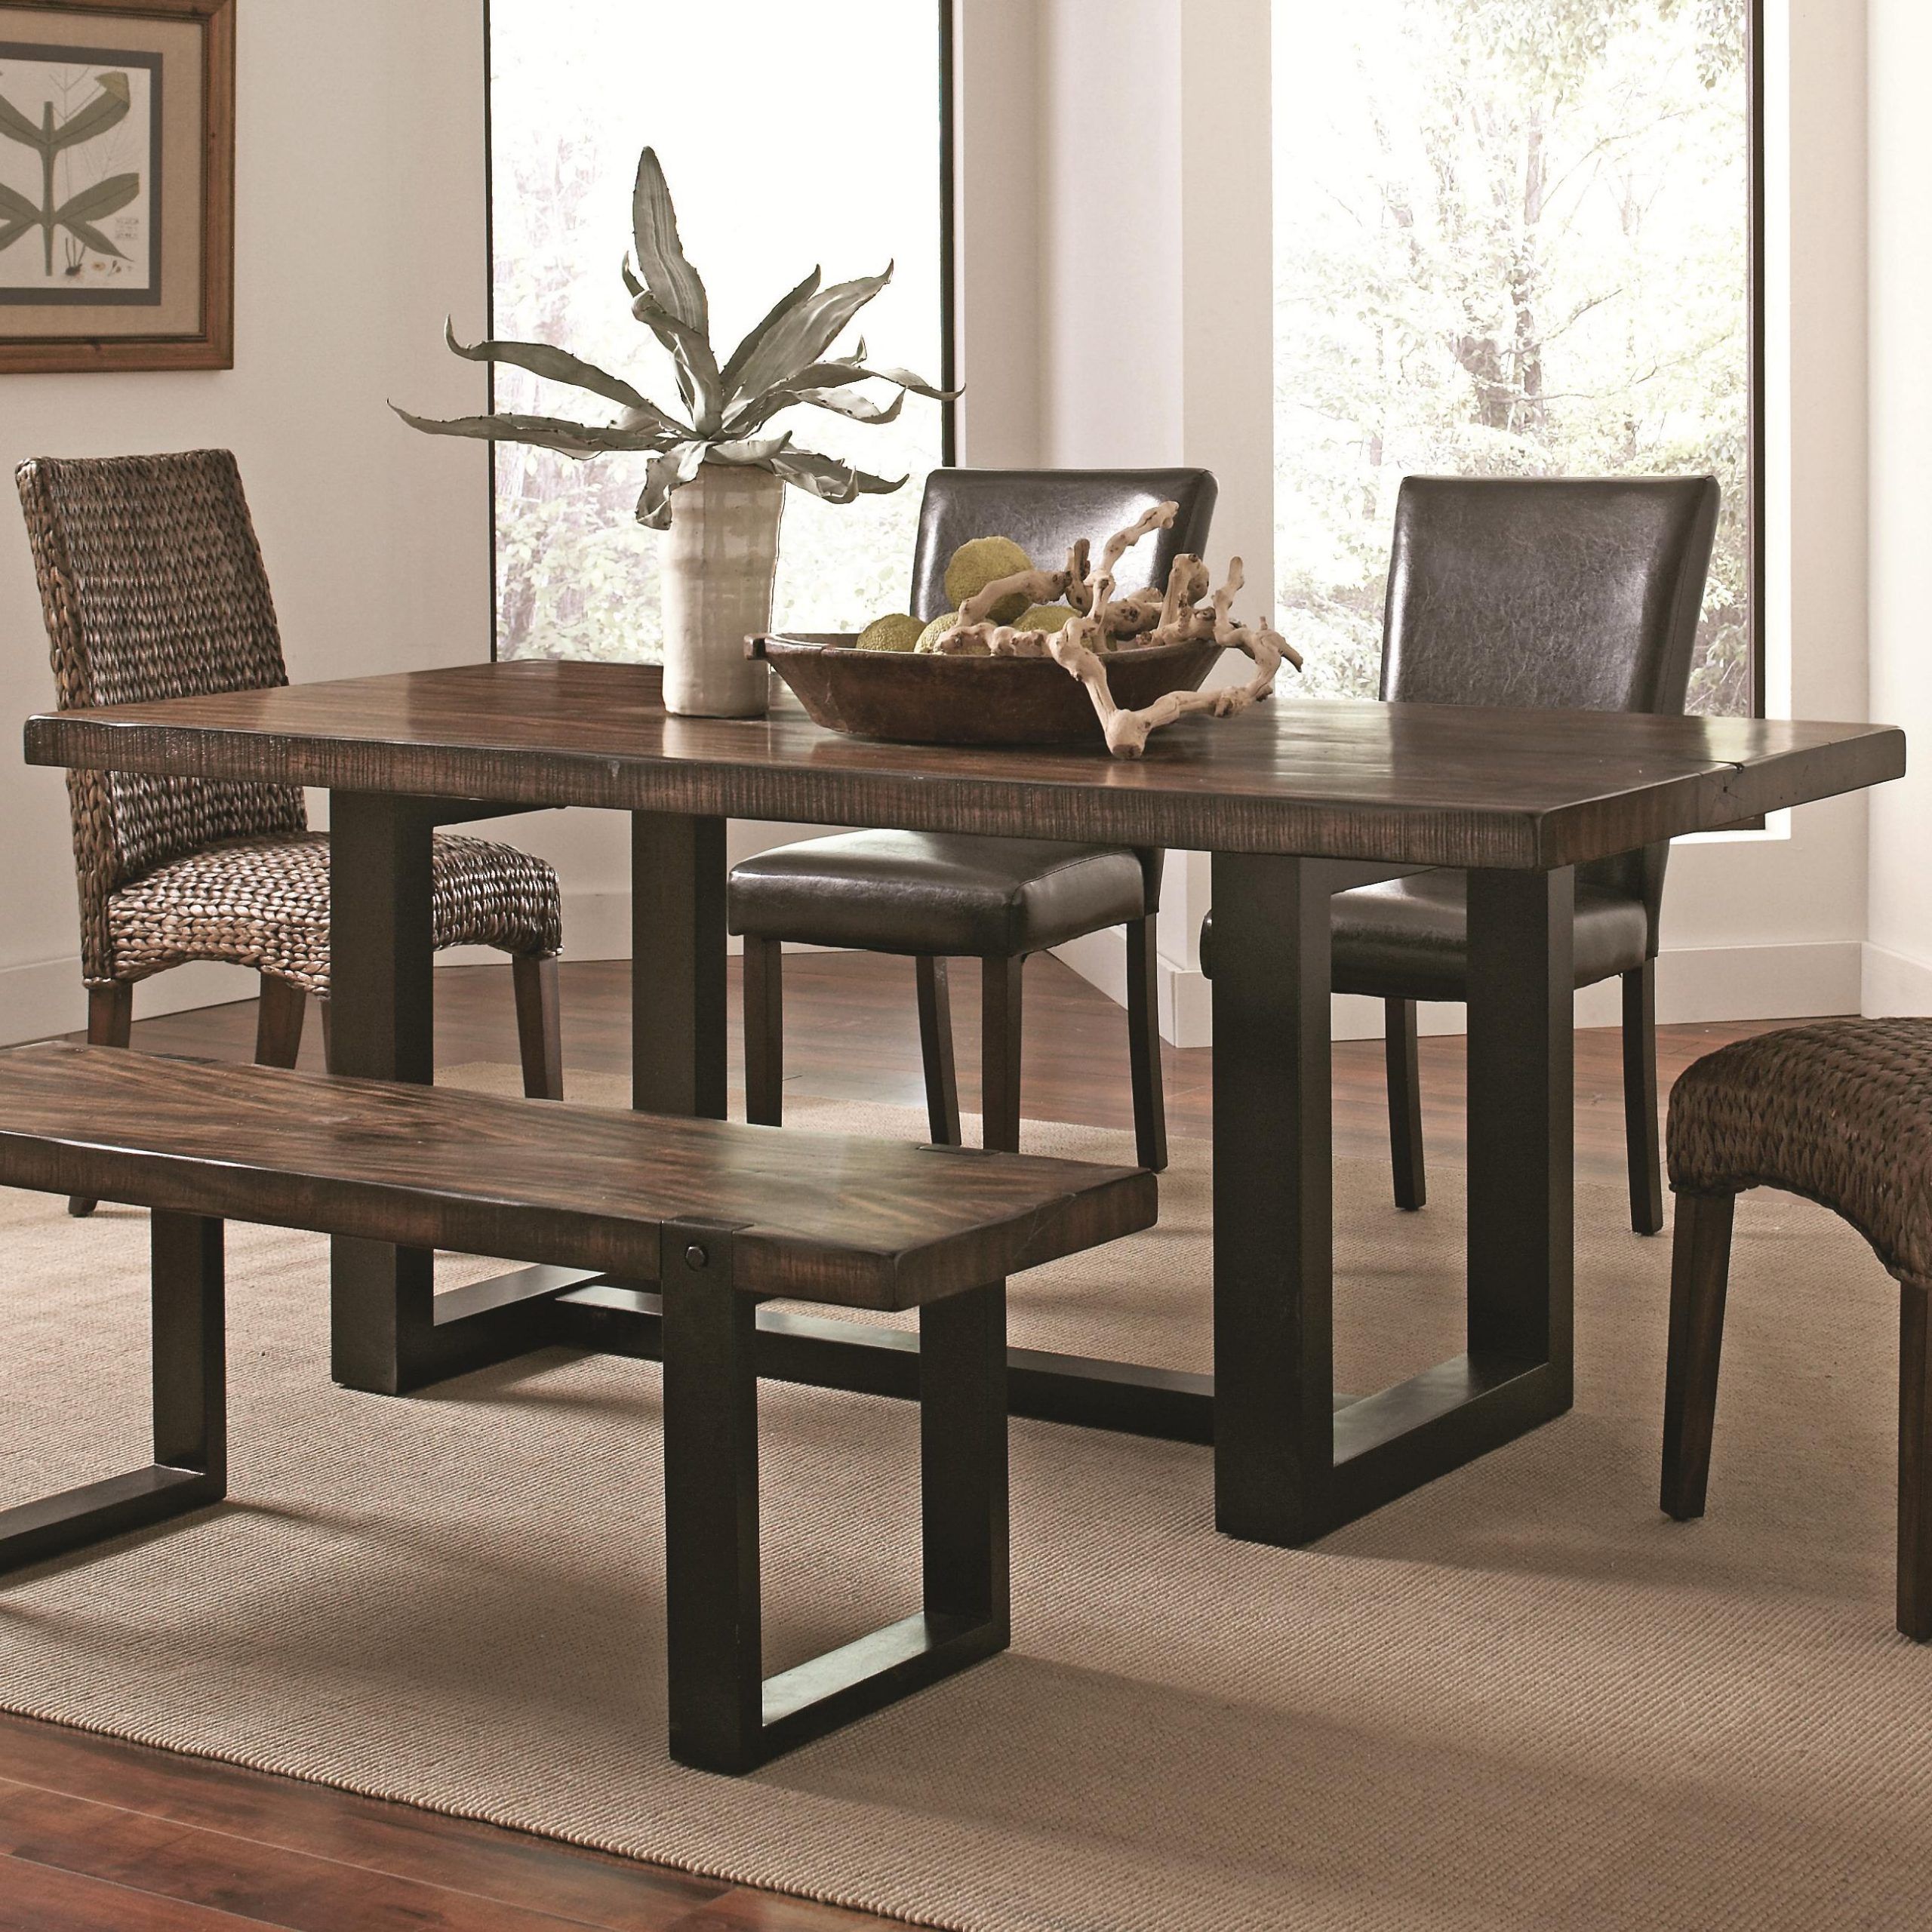 Westbrook Dining Casual Rustic Dining Table | Quality For Most Recent Dark Hazelnut Dining Tables (View 2 of 15)